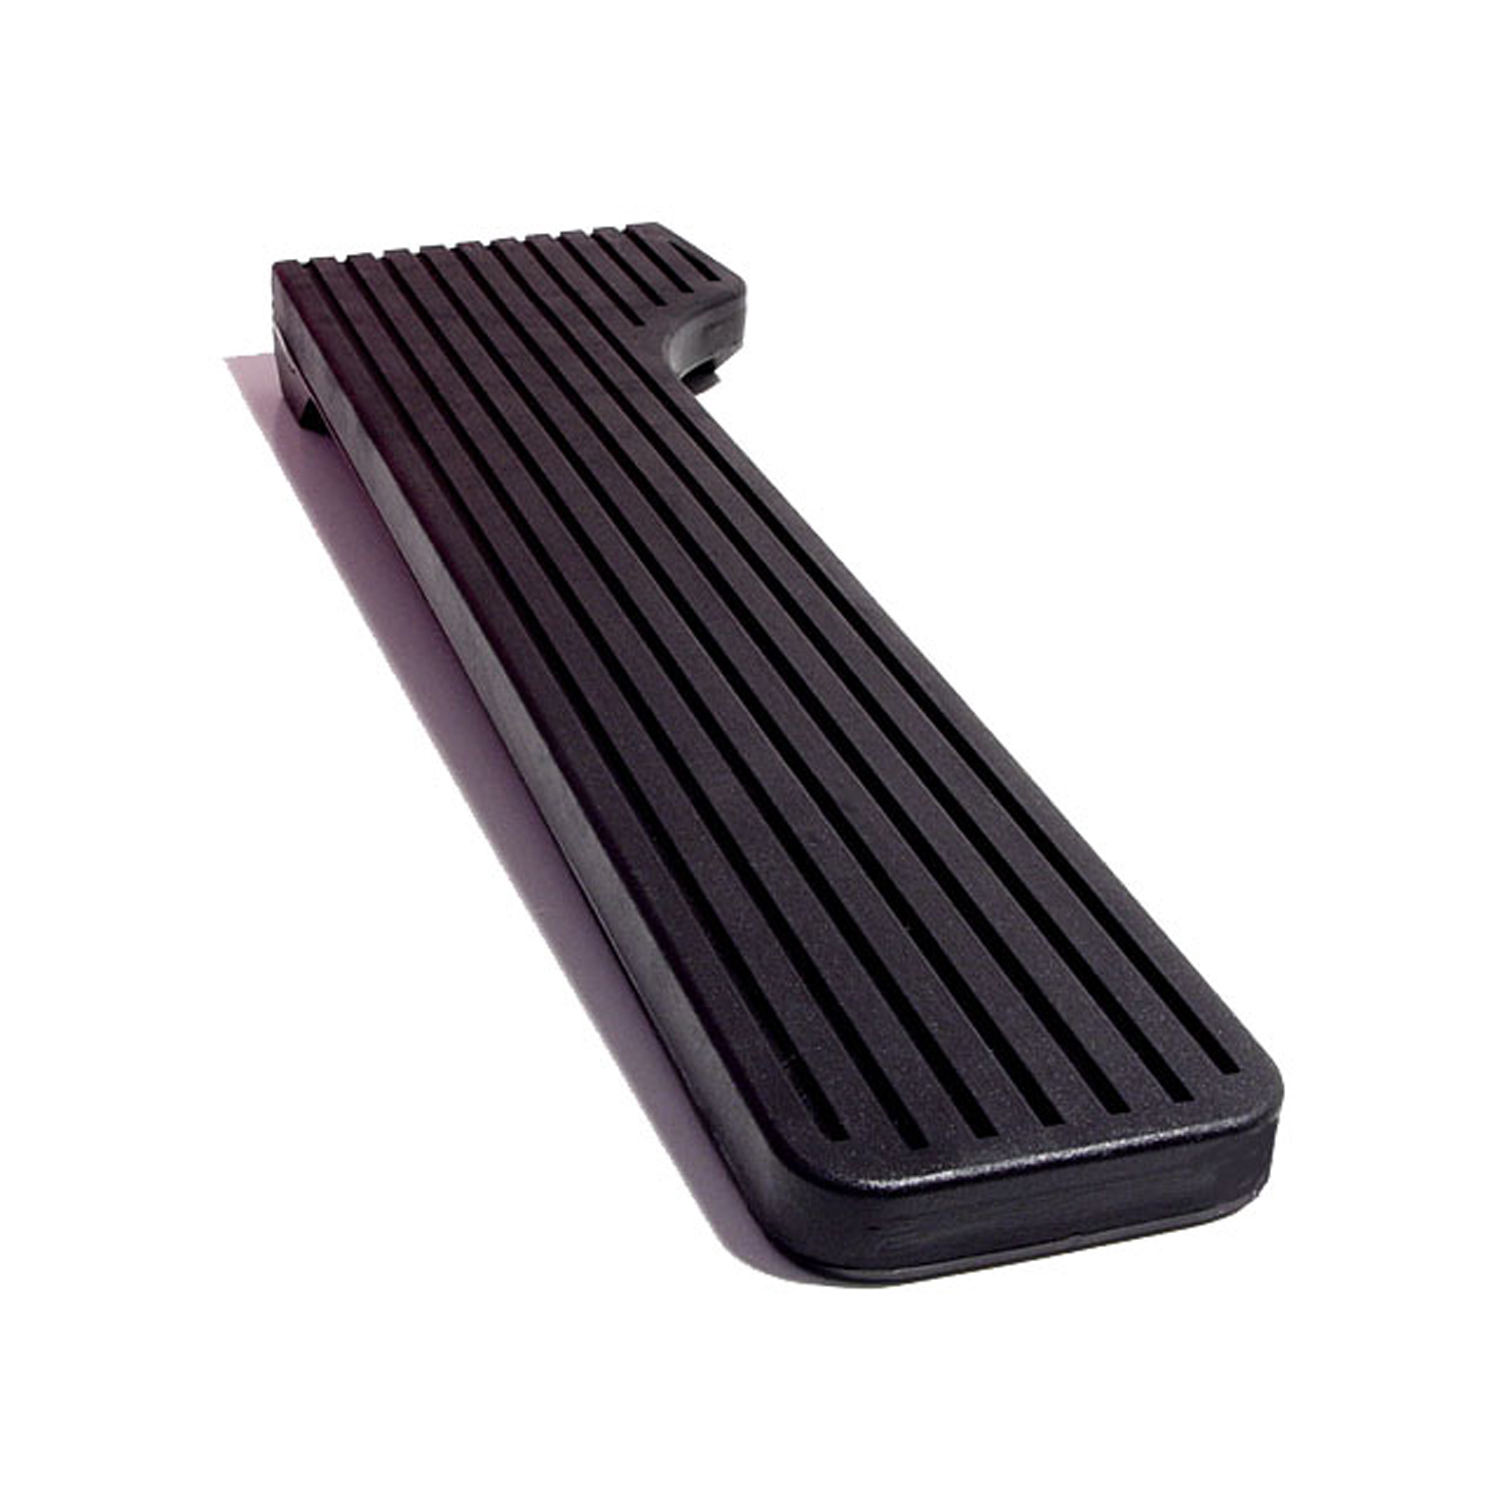 1970 Chevrolet Impala Accelerator Pedal Pad without flange-AP 31-B